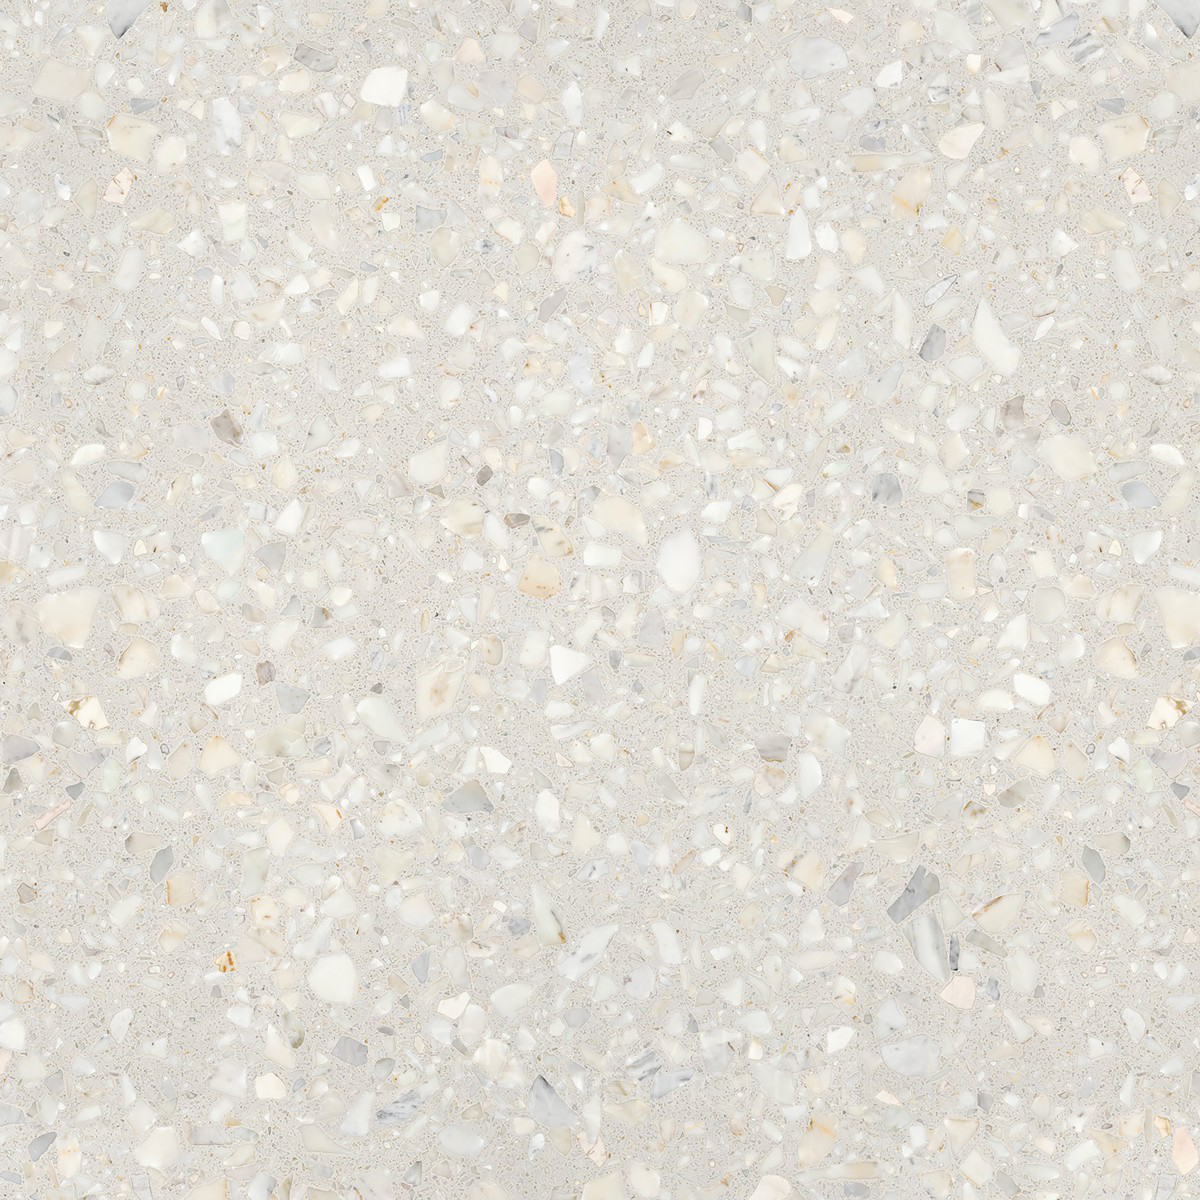 Neolith Surfacing Material